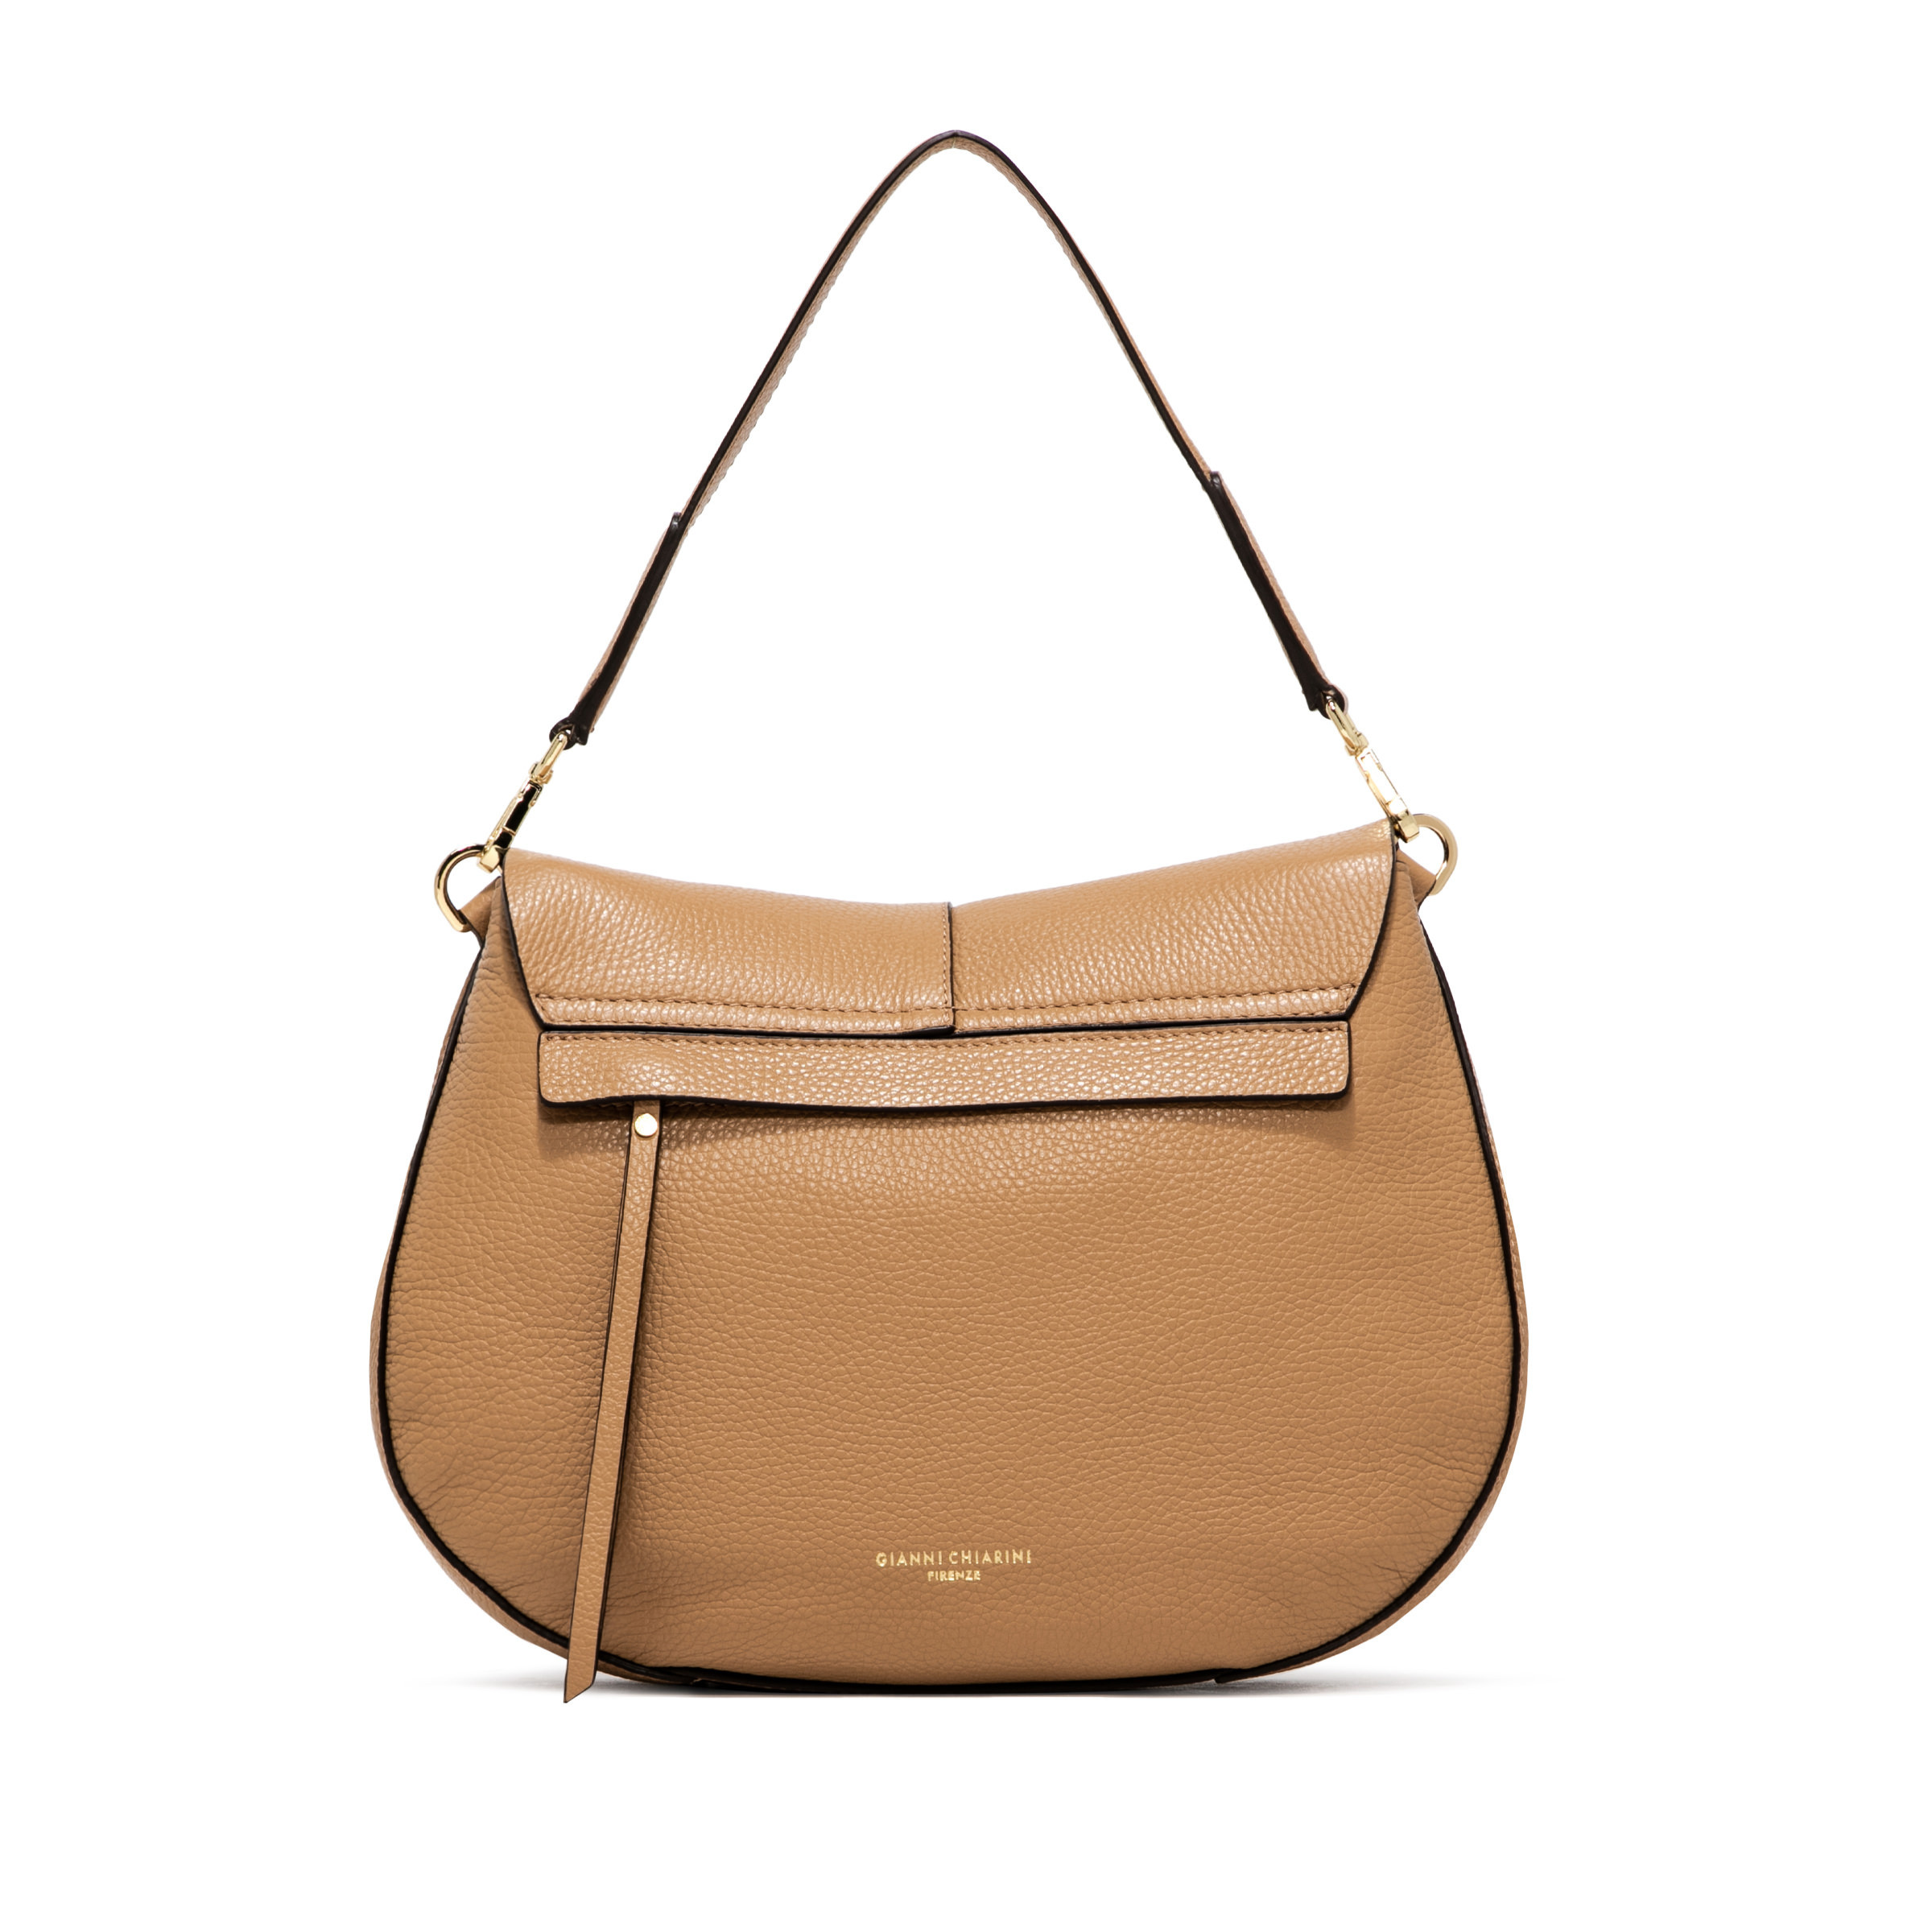 Gianni Chiarini - Helena Round bag in leather, Natural, large image number 3